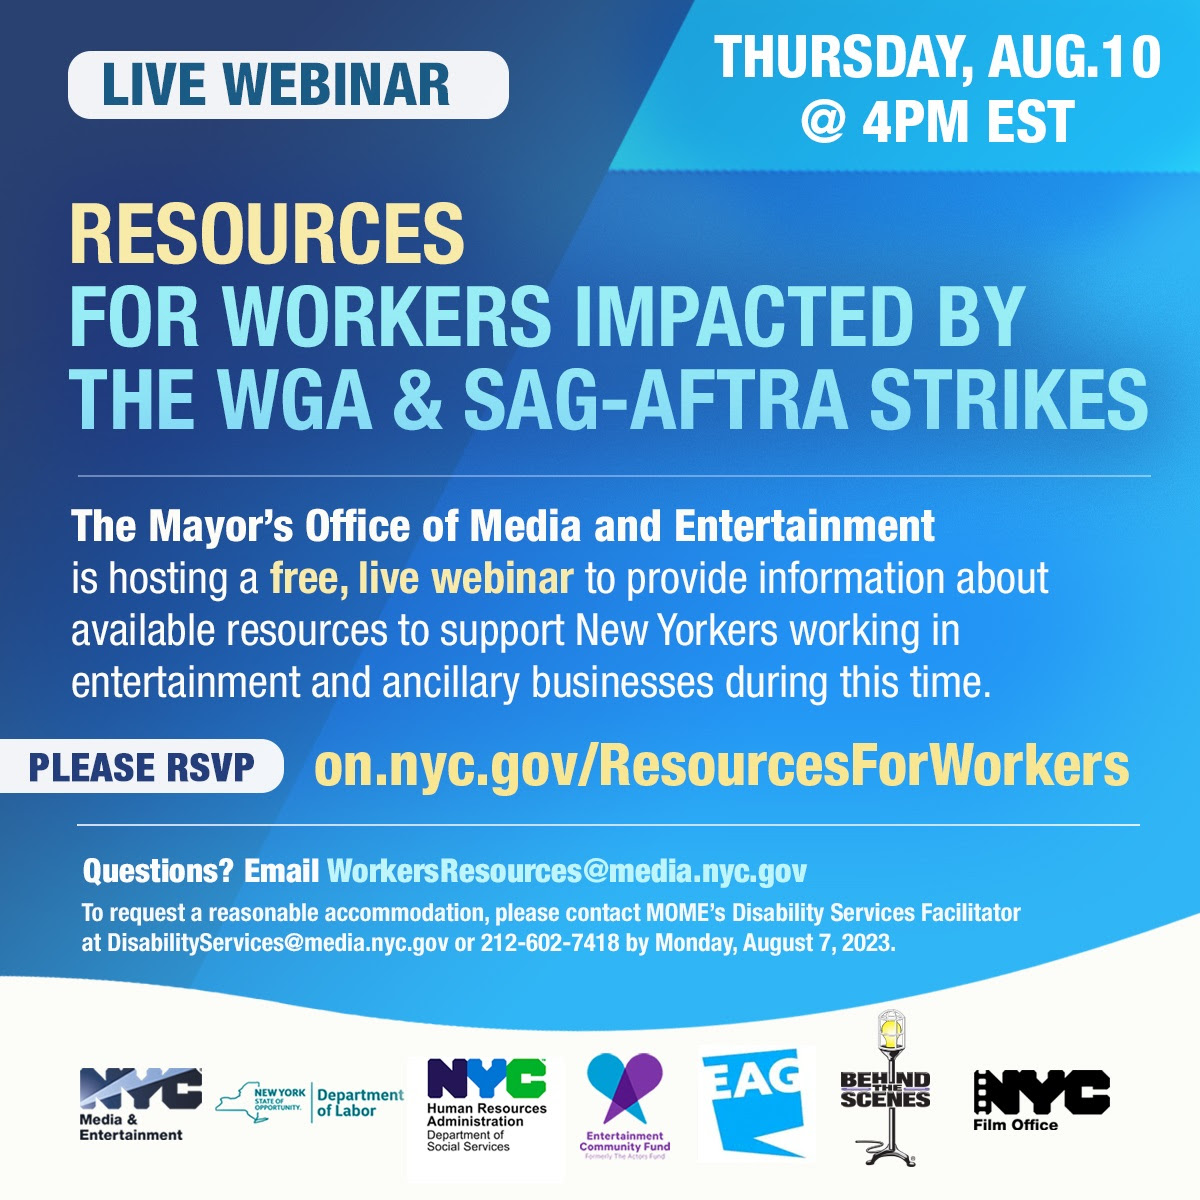 A blue background with text: RESOURCES FOR WORKERS IMPACTED BY THE WGA & SAG-AFTRA STRIKES Live Webinar. Date & Time: August 10, 2023  4:00 p.m.  The Mayor’s Office of Media and Entertainment is hosting a free, live webinar to provide information and access to available resources to support New Yorkers working in entertainment and ancillary businesses during this time. Please RSVP: on.nyc.gov/ResourcesForWorkers. Questions? email WorkersResources@media.nyc.gov. To request a reasonable accommodation, please contact MOME’s Disability Services Facilitator at DisabilityServices@media.nyc.gov or 212-602-7418 (voice only) by Friday, August 4, 2023.